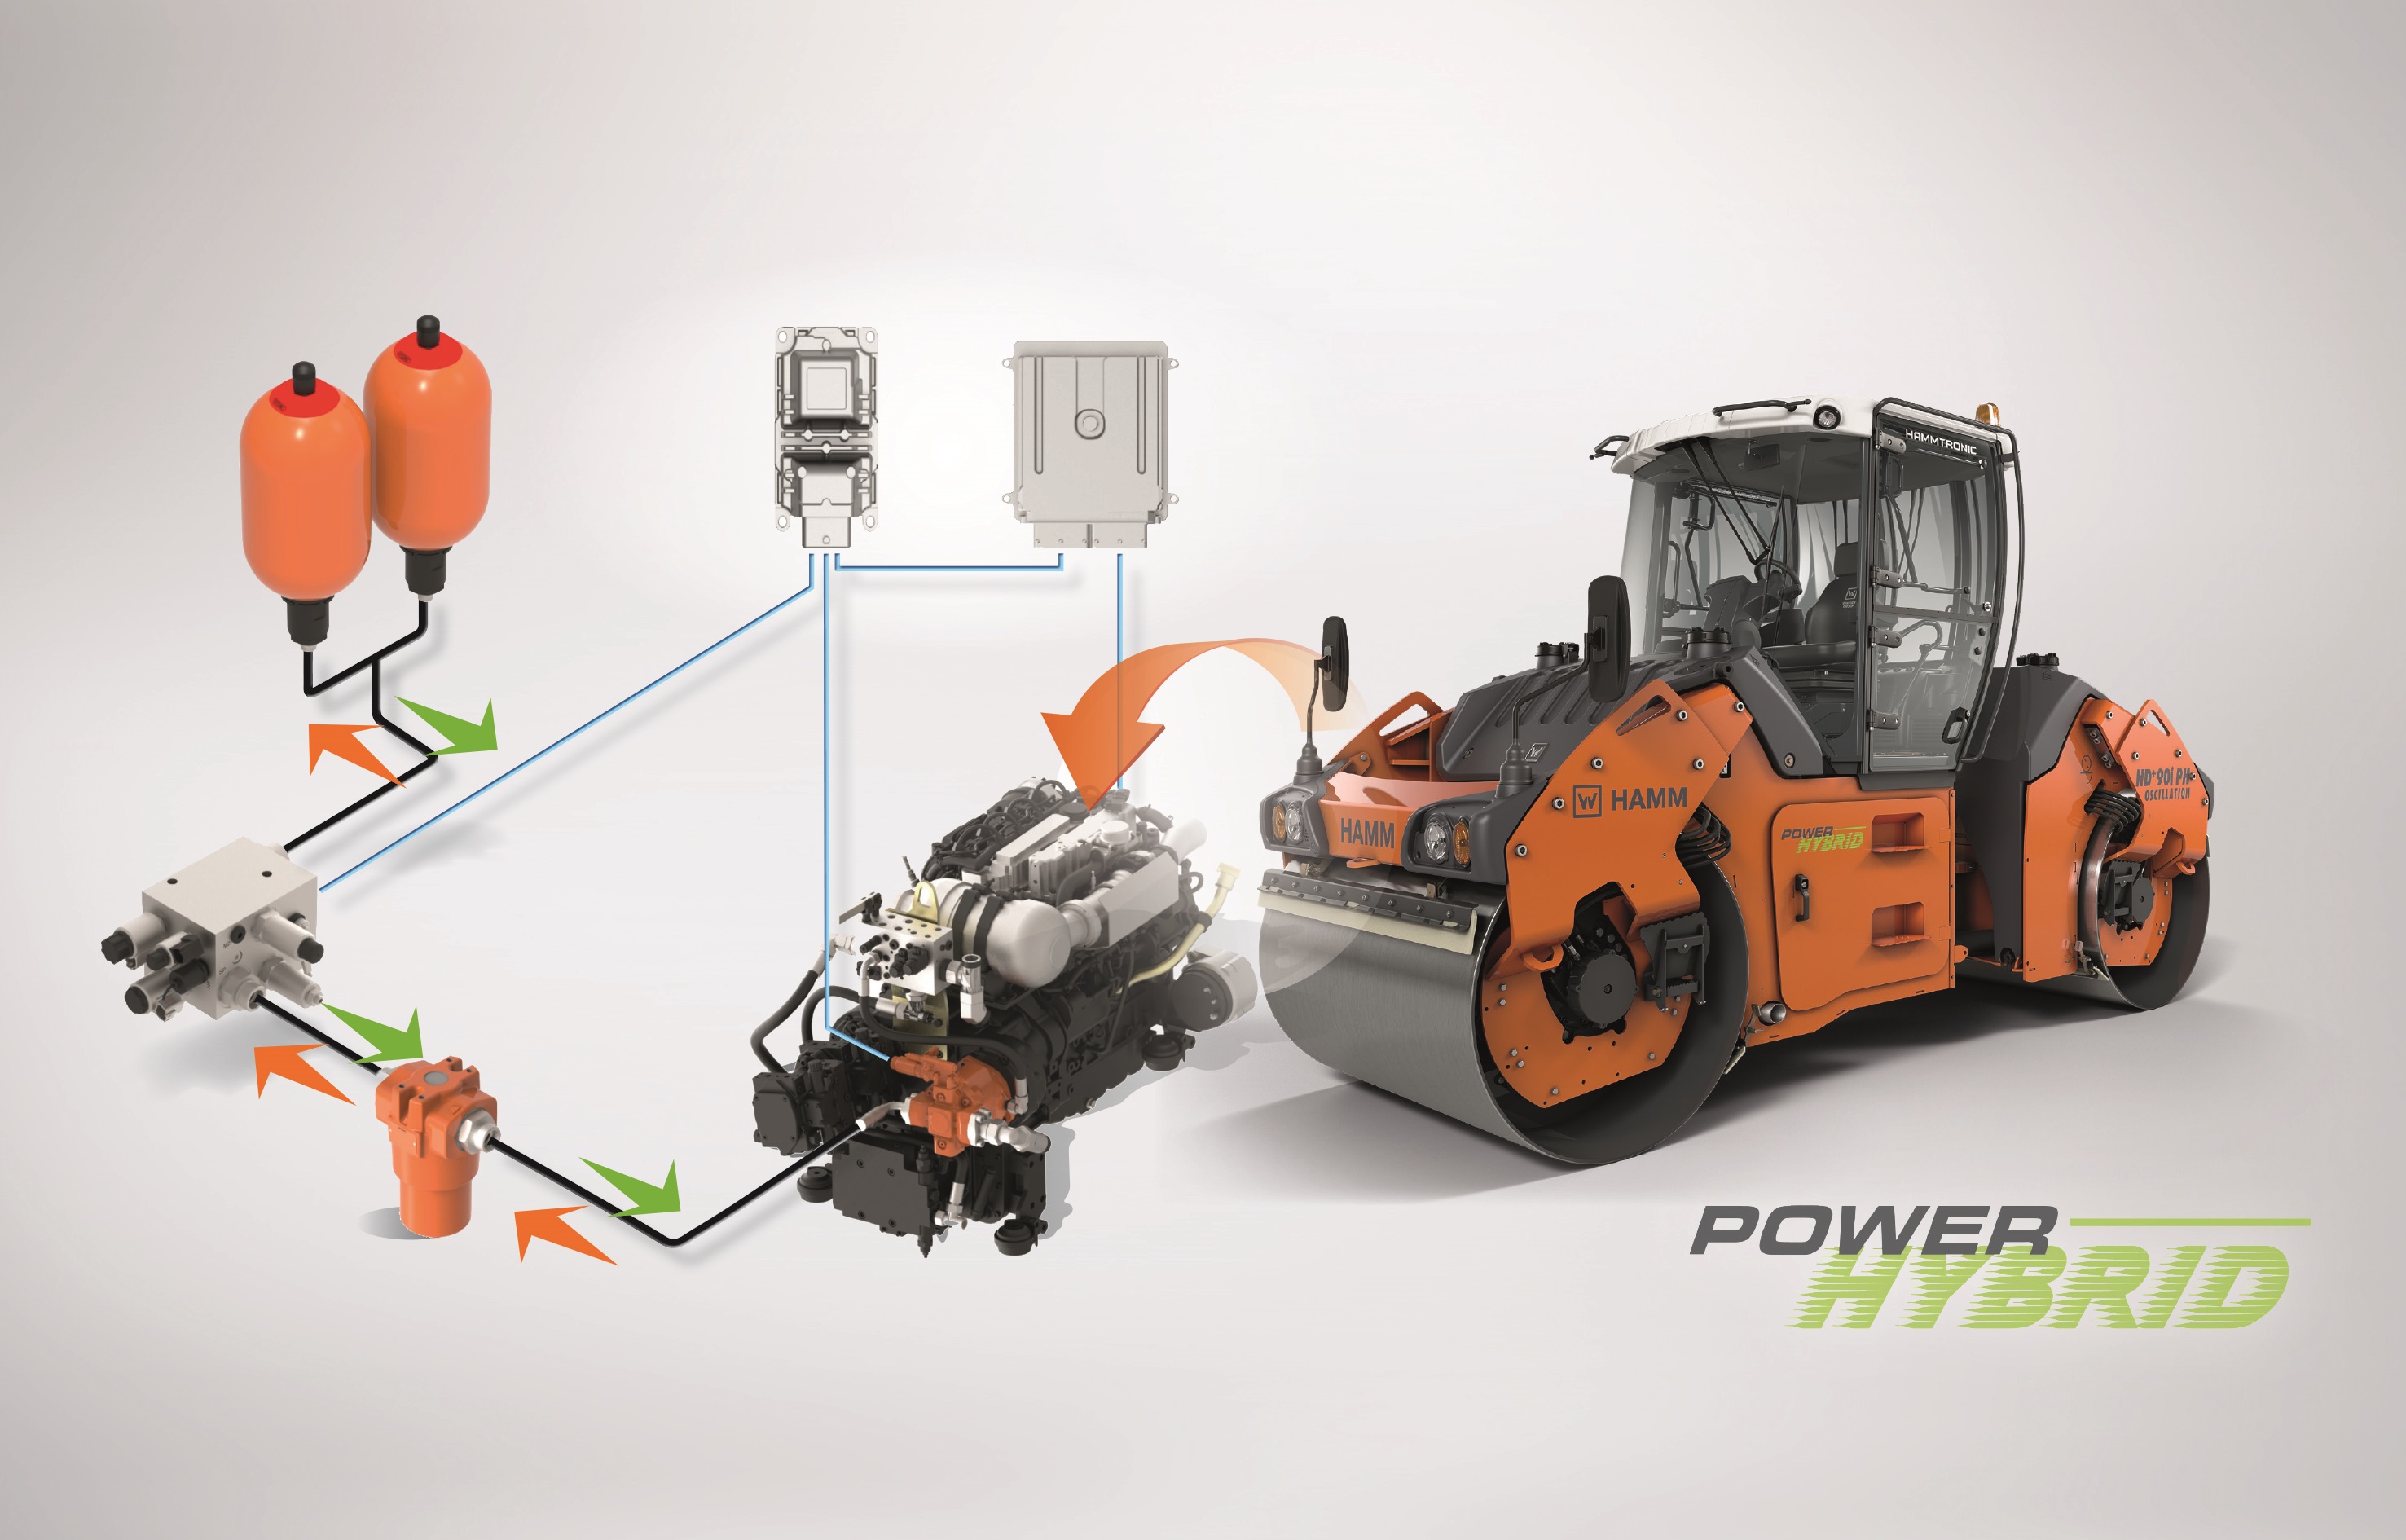 Fewer components, greater impact: Upon demand, with the Power Hybrid rollers from Hamm, the hydraulic accumulator supplies up to 20 kW more than the diesel power unit in a short time.